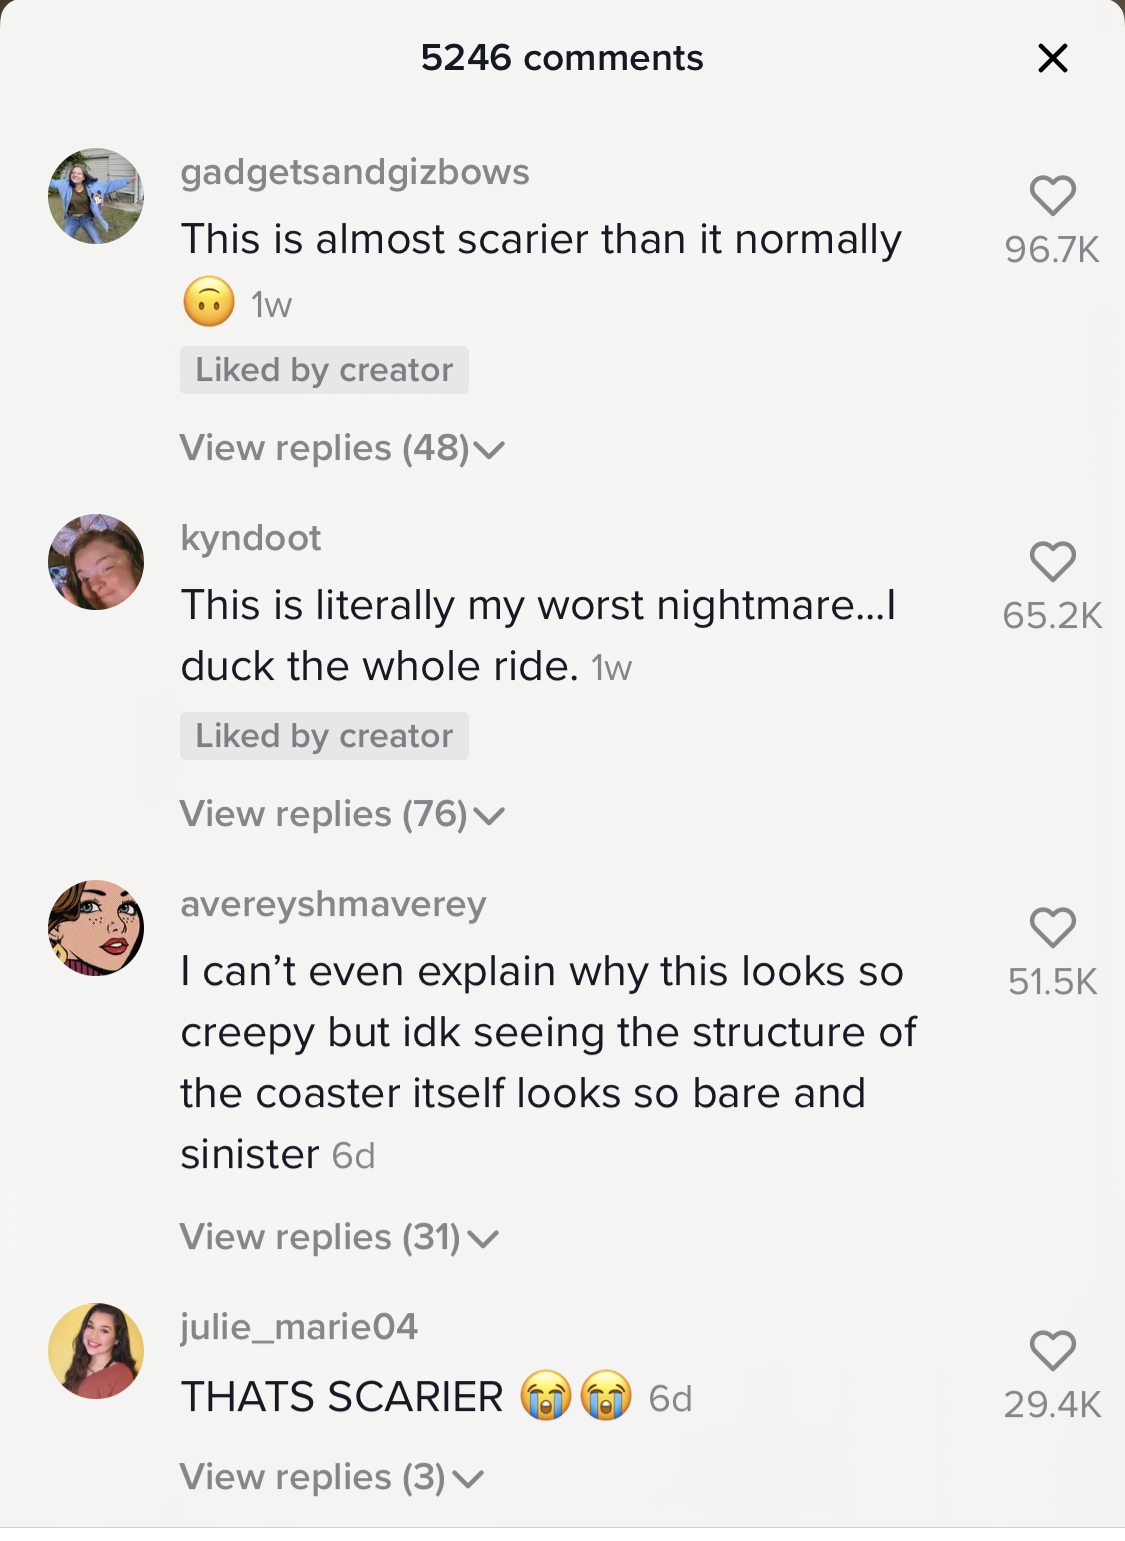 The comments section of the video that has comments about how scary the ride looks with the lights on.